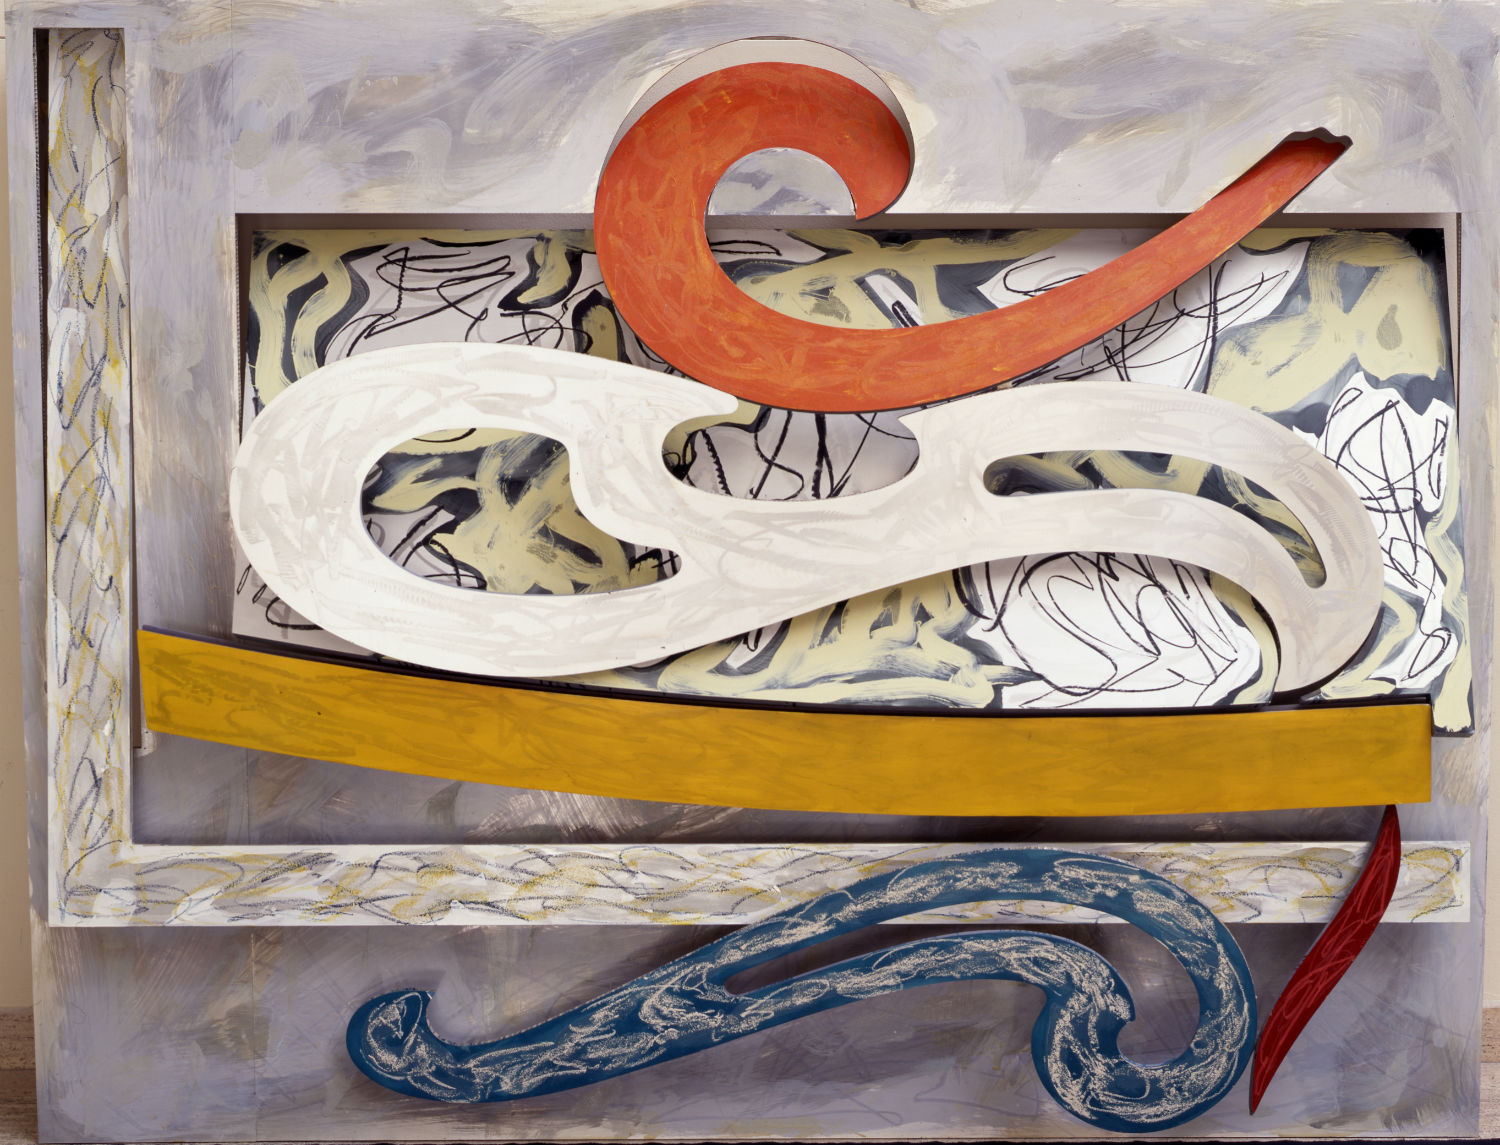 "Eskimo Curlew," Litho crayon, etching, lacquer, ink, glass, acrylic paint, and oilstick on aluminum, 1976